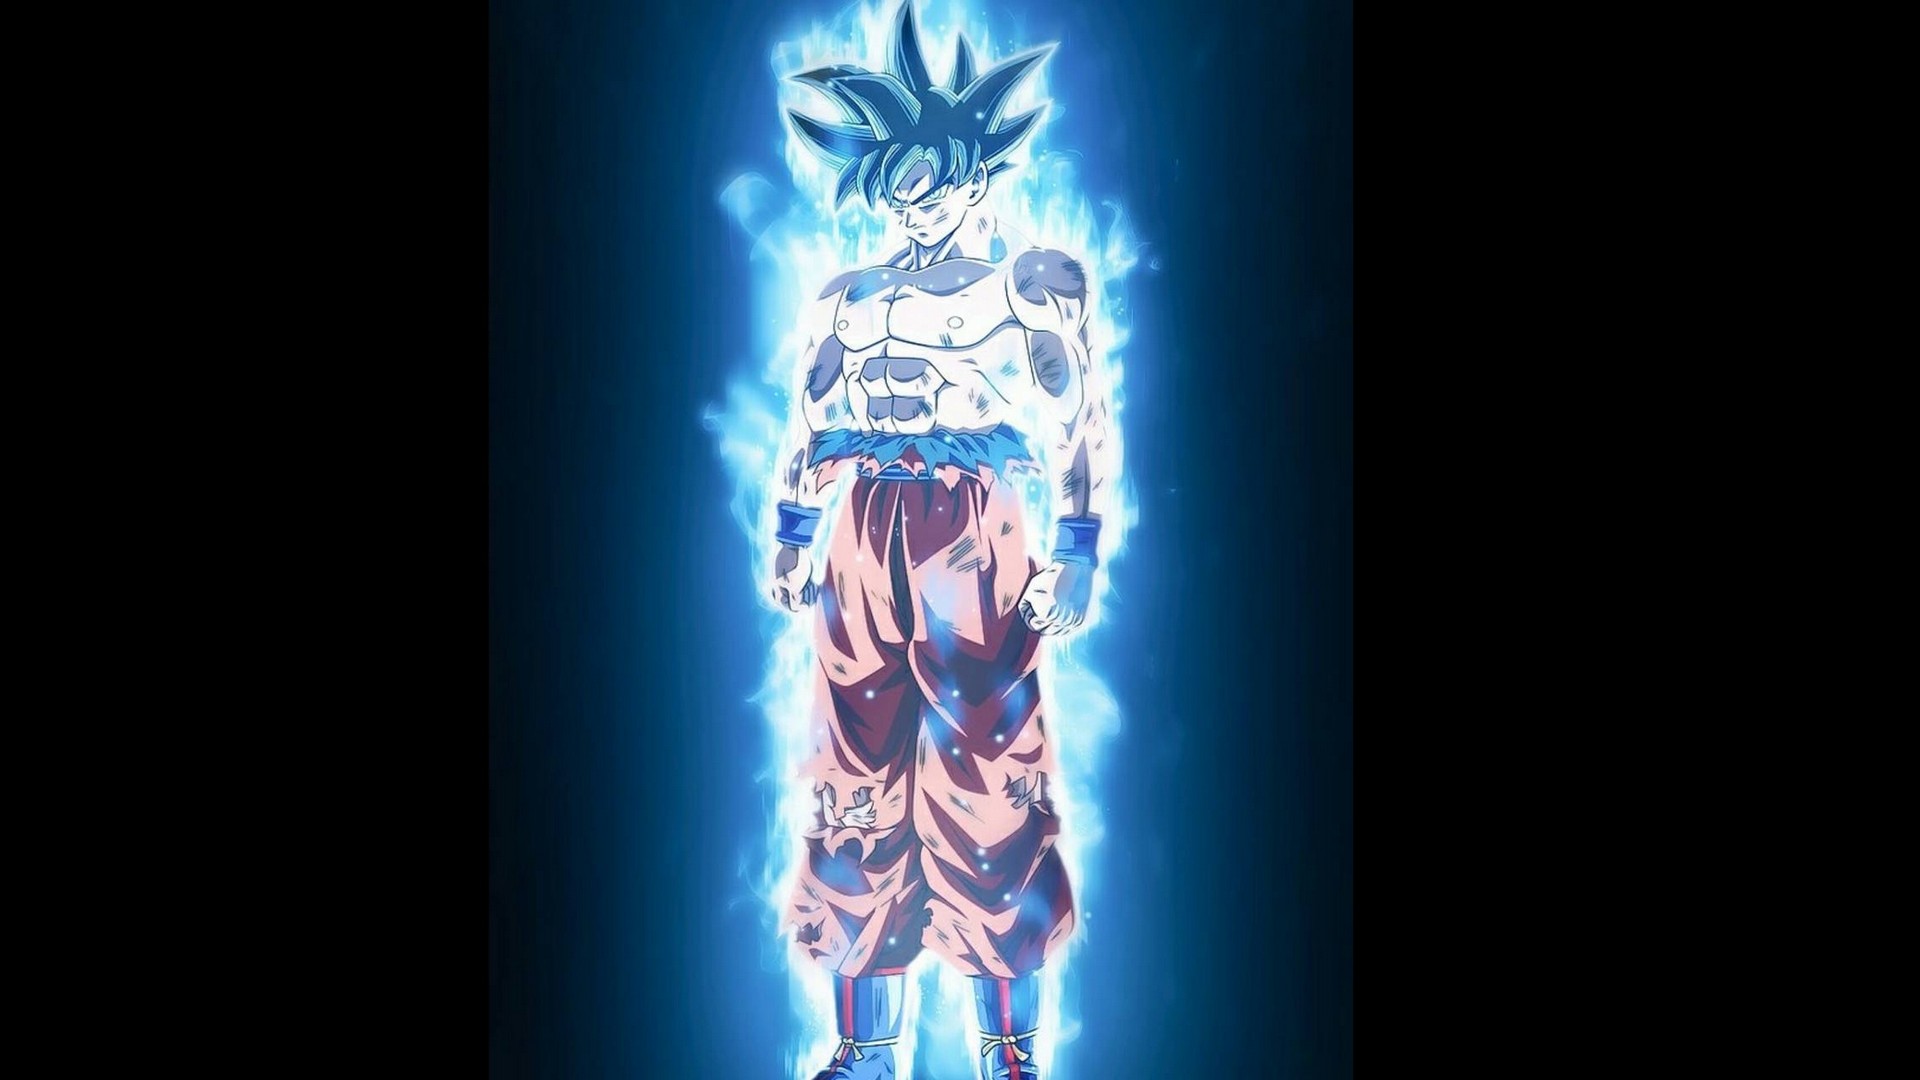 Goku Background Wallpaper HD with image resolution 1920x1080 pixel. You can make this wallpaper for your Desktop Computer Backgrounds, Mac Wallpapers, Android Lock screen or iPhone Screensavers